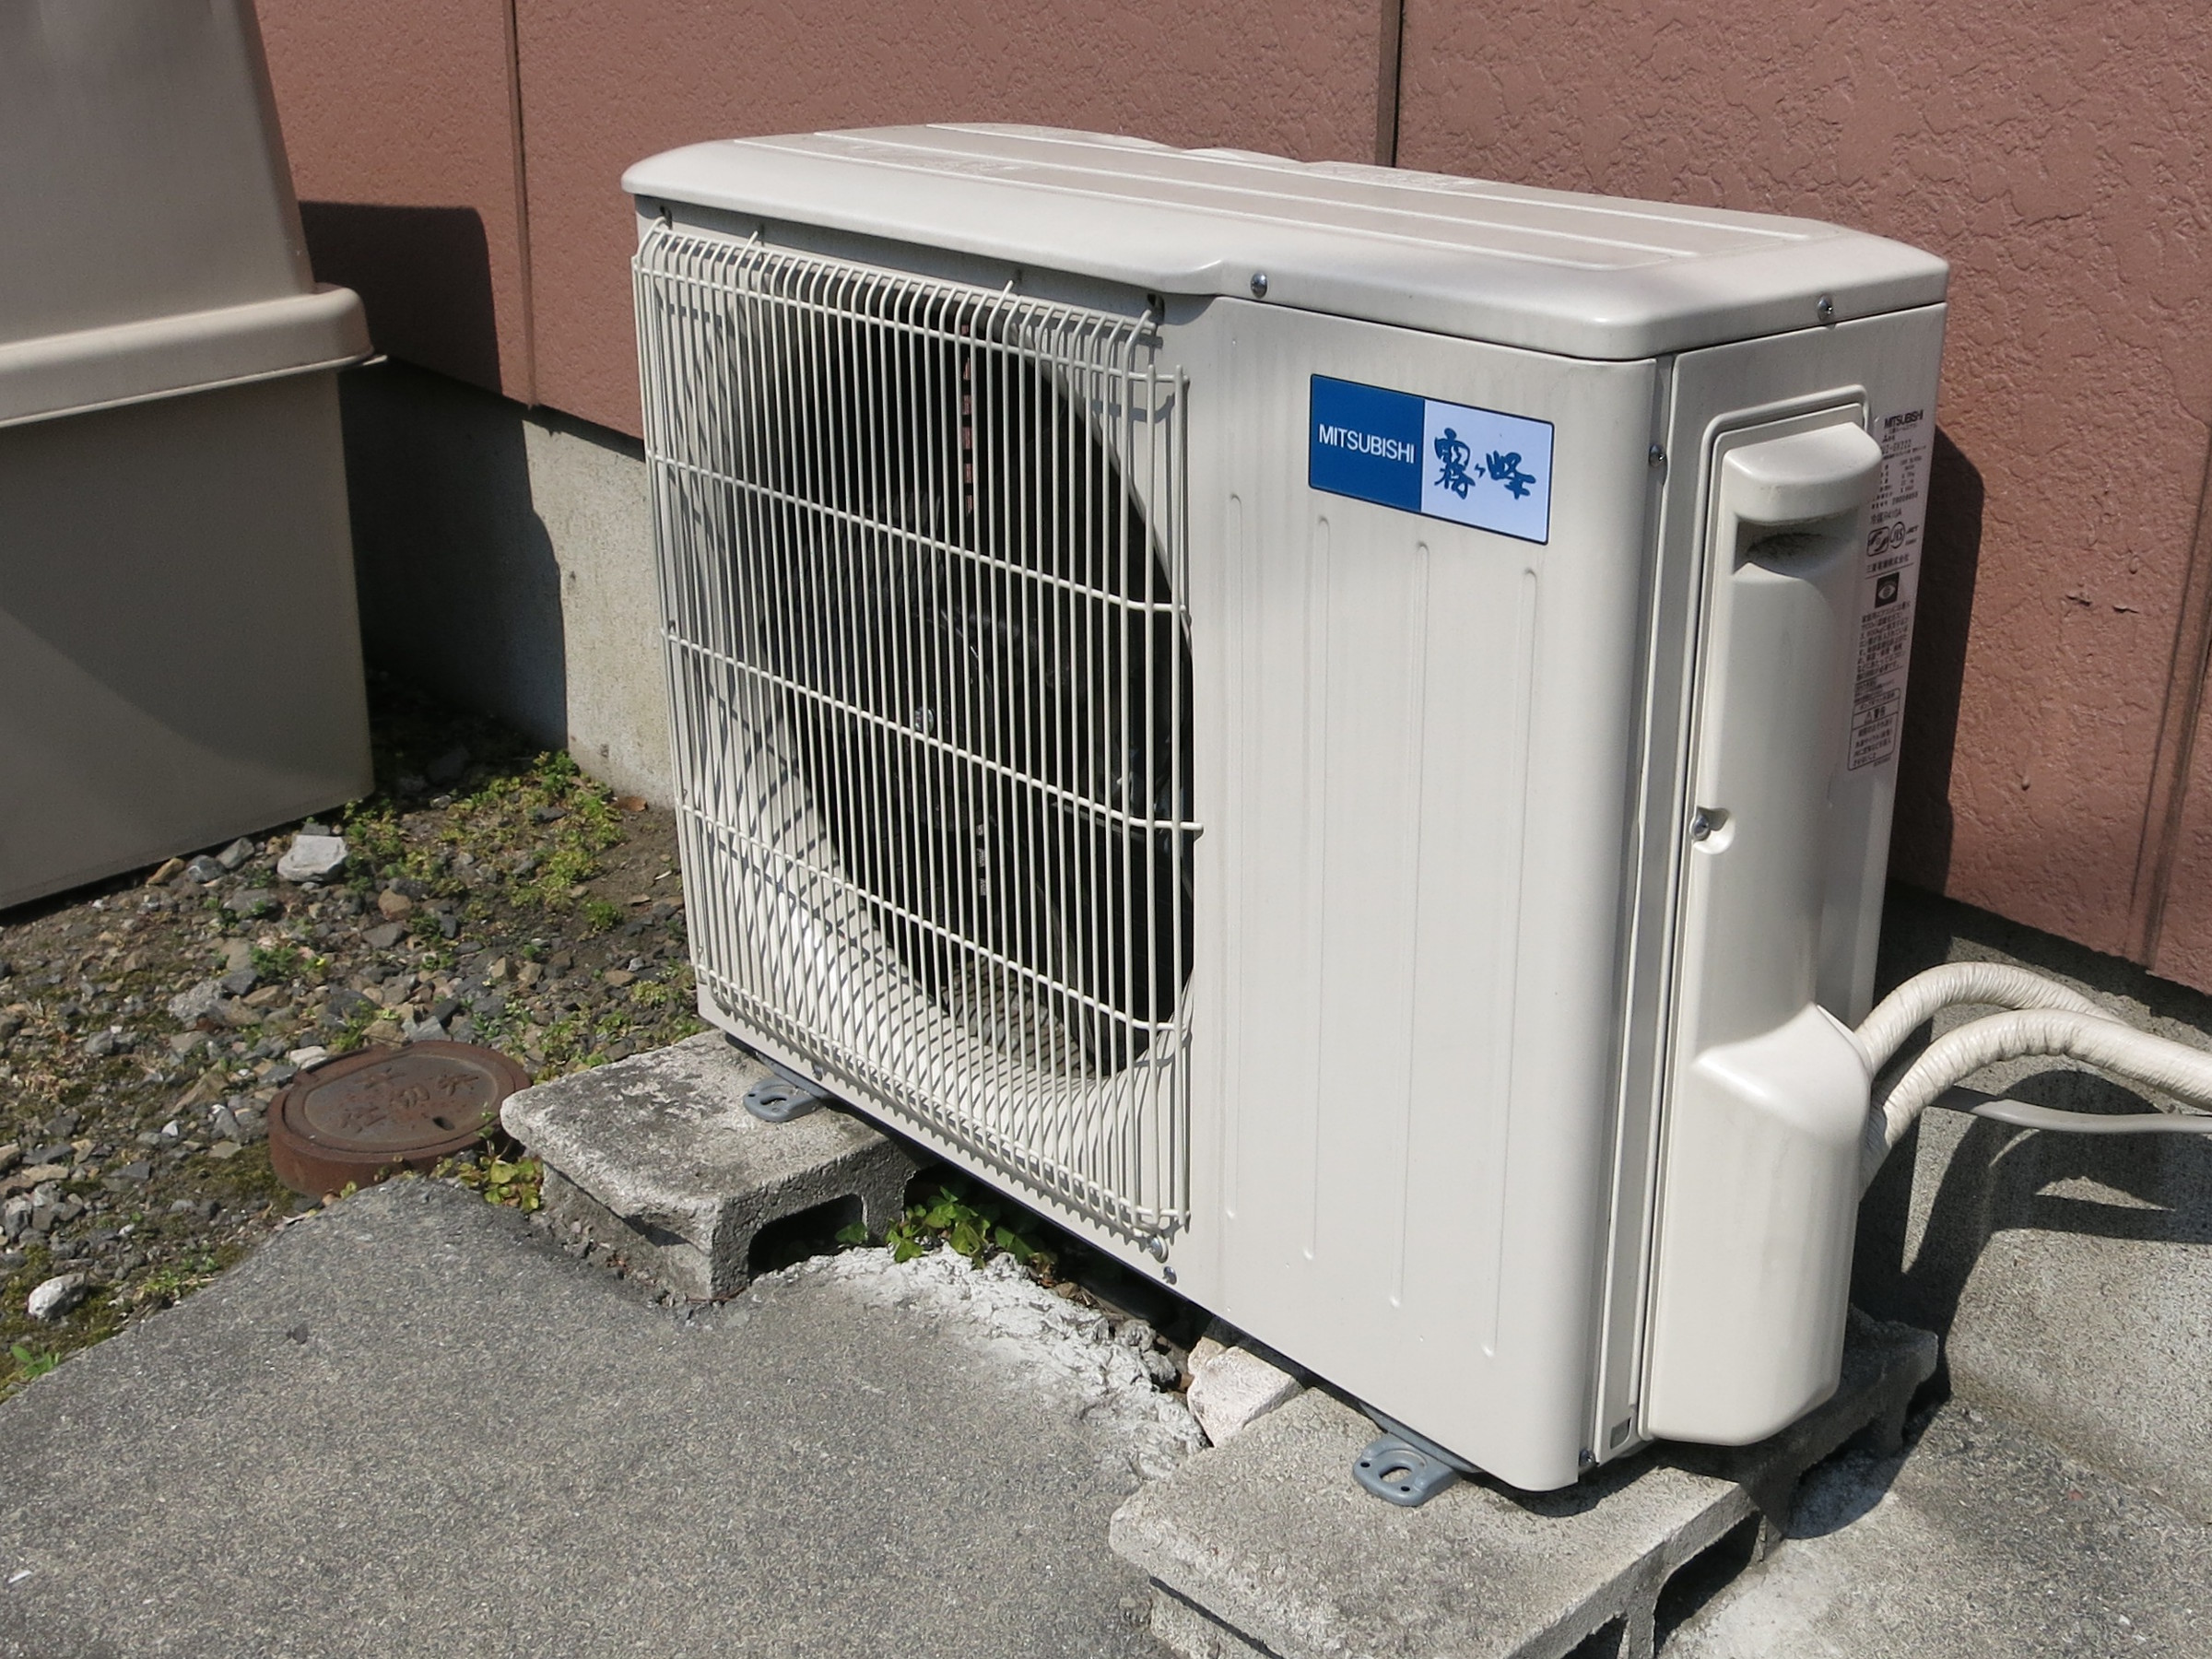 How To Put Freon In An Ac Unit